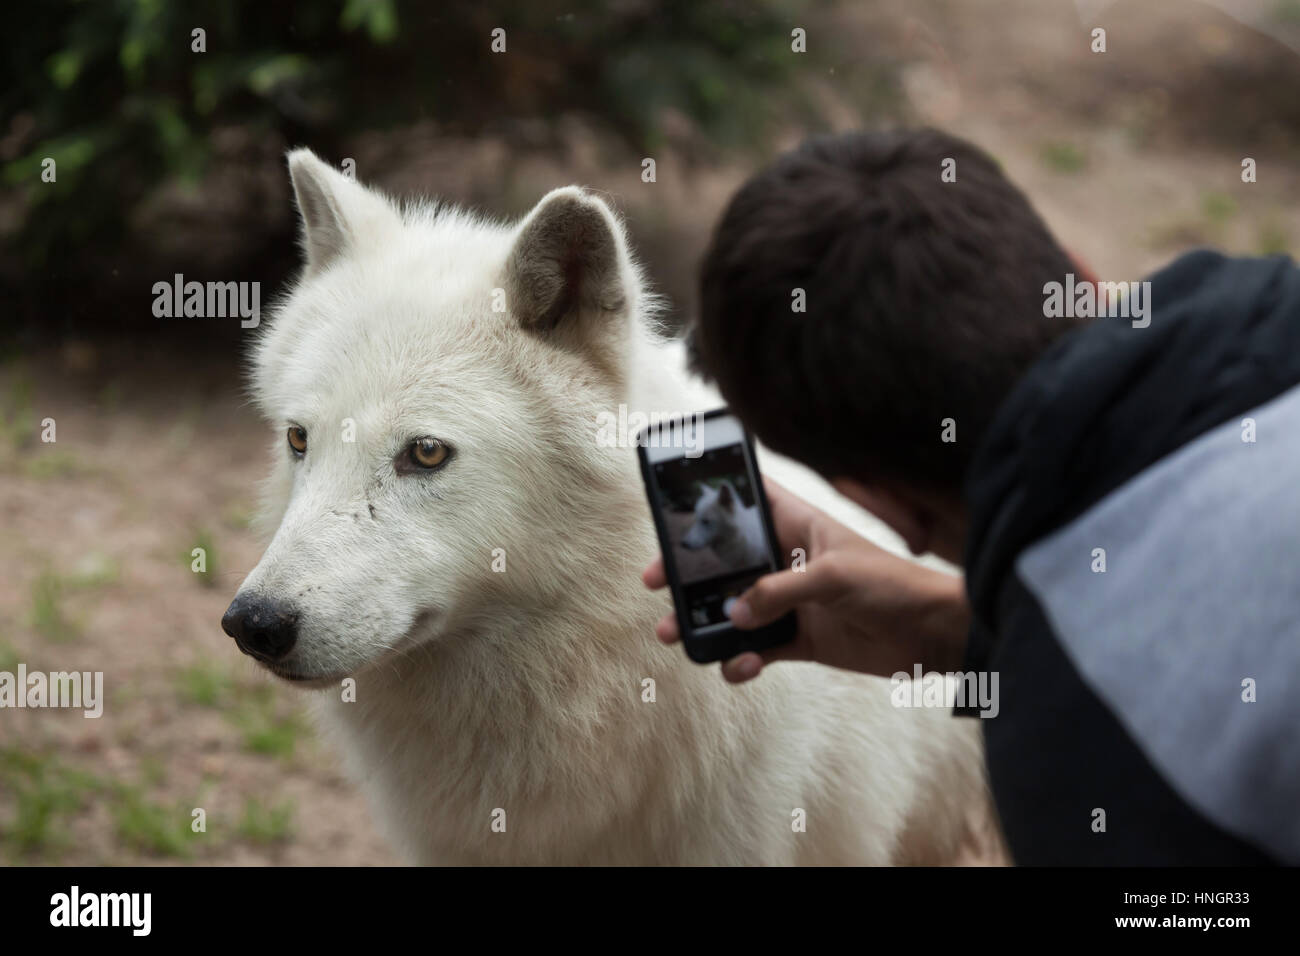 Visitor uses a smartphone to photograph the Arctic wolf (Canis lupus arctos), also known as the Melville Island wolf at La Fleche Zoo in the Loire Valley, France. Stock Photo